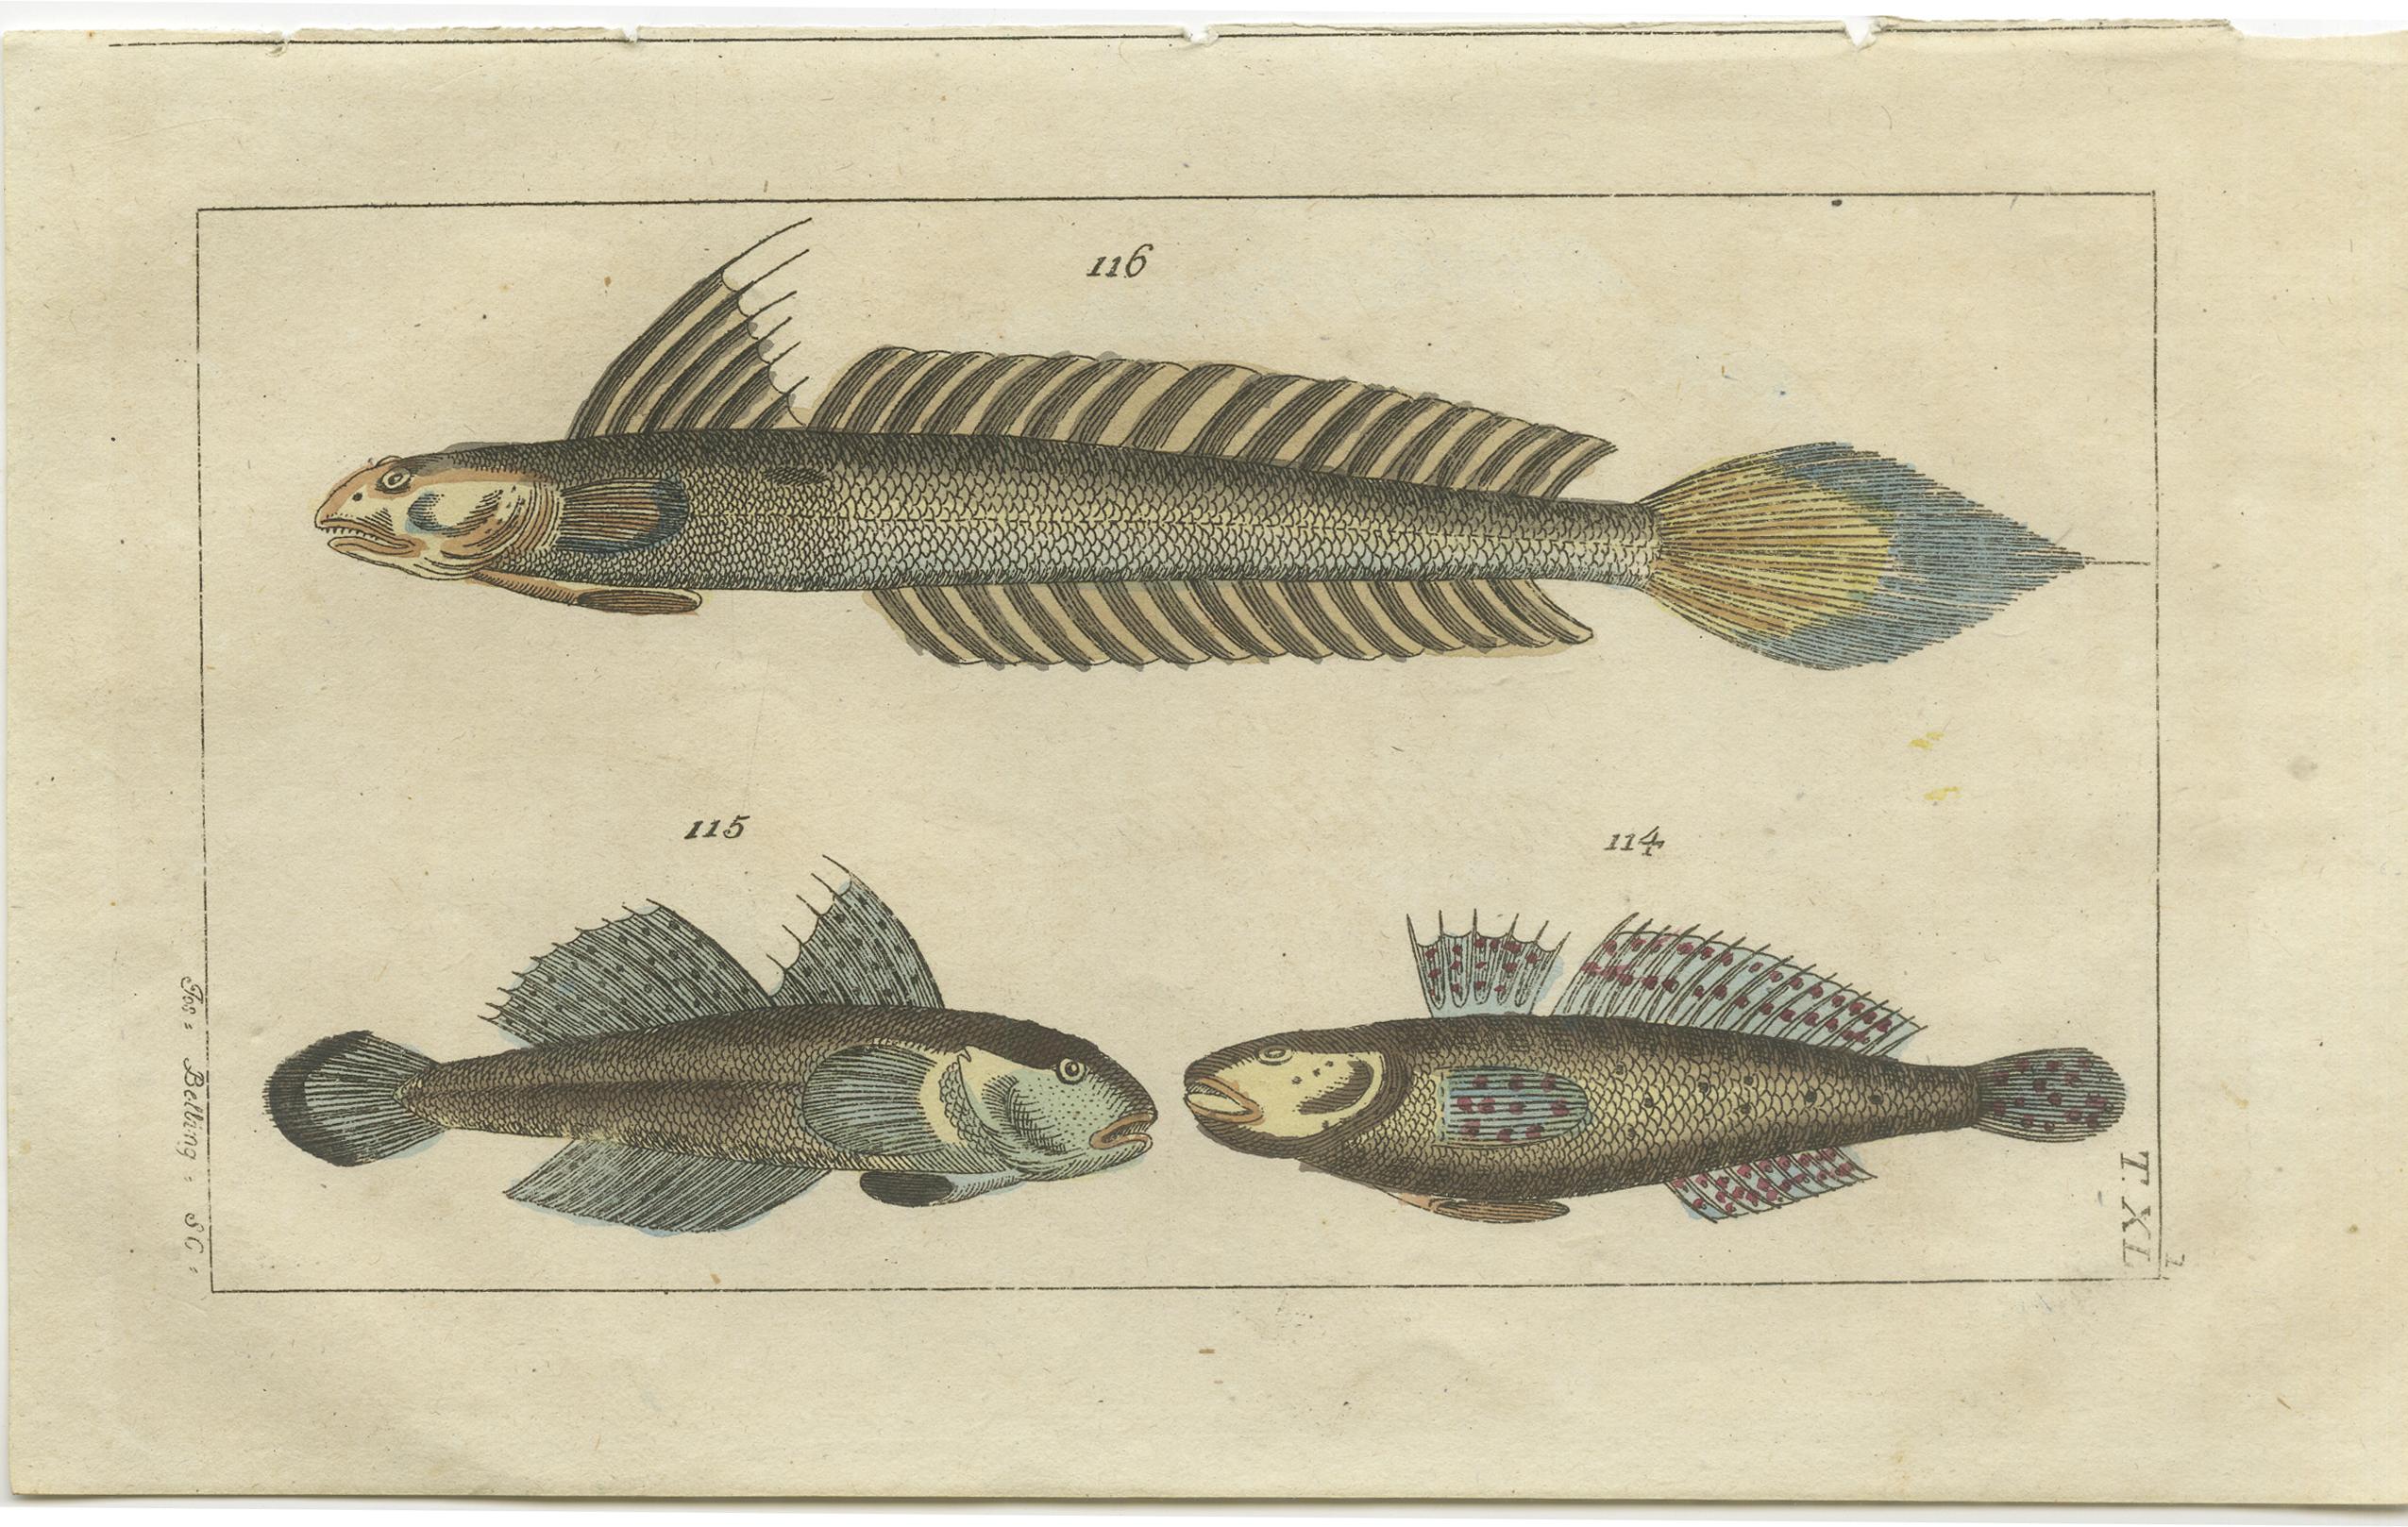 Set of two original antique fish prints. Dolphin fish or mahi mahi, Coryphaena hippurus 112, and sand tilefish, Malacanthus plumieri 113. Black goby, Gobius niger 114, 115, and highfin goby, Gobionellus oceanicus 116.

These prints originate from